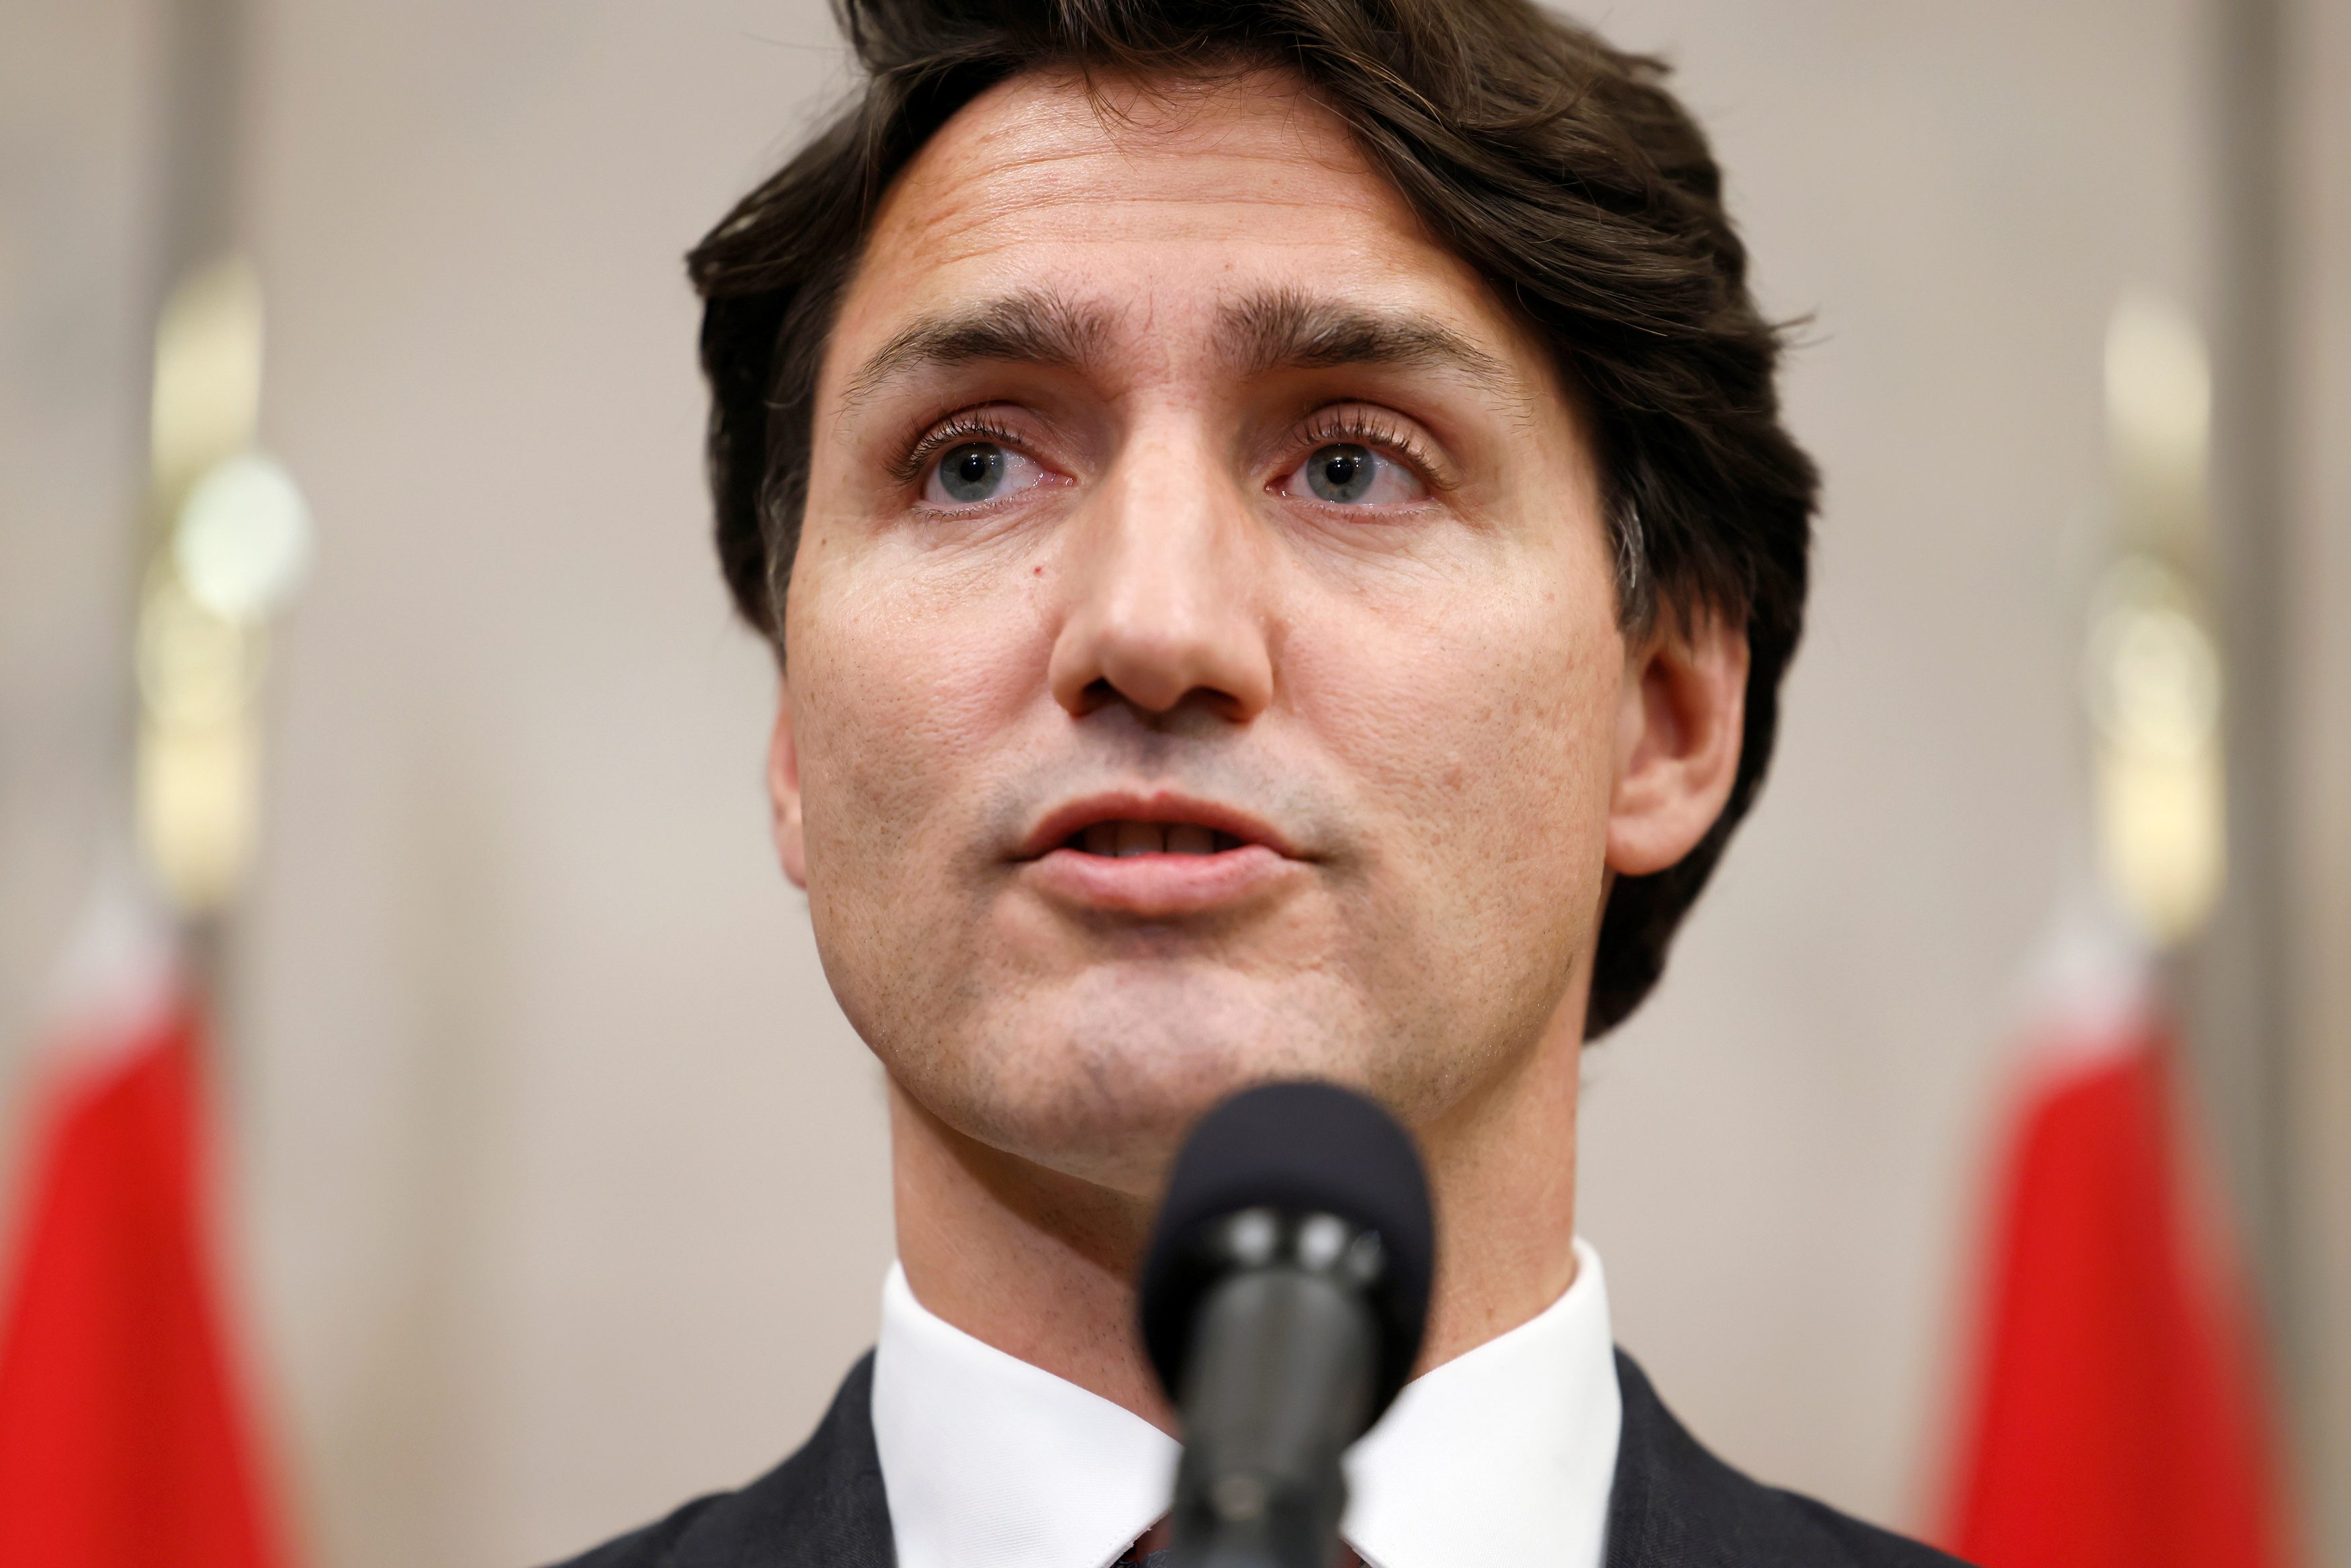 Canadian PM Trudeau says 2 detained citizens have left China